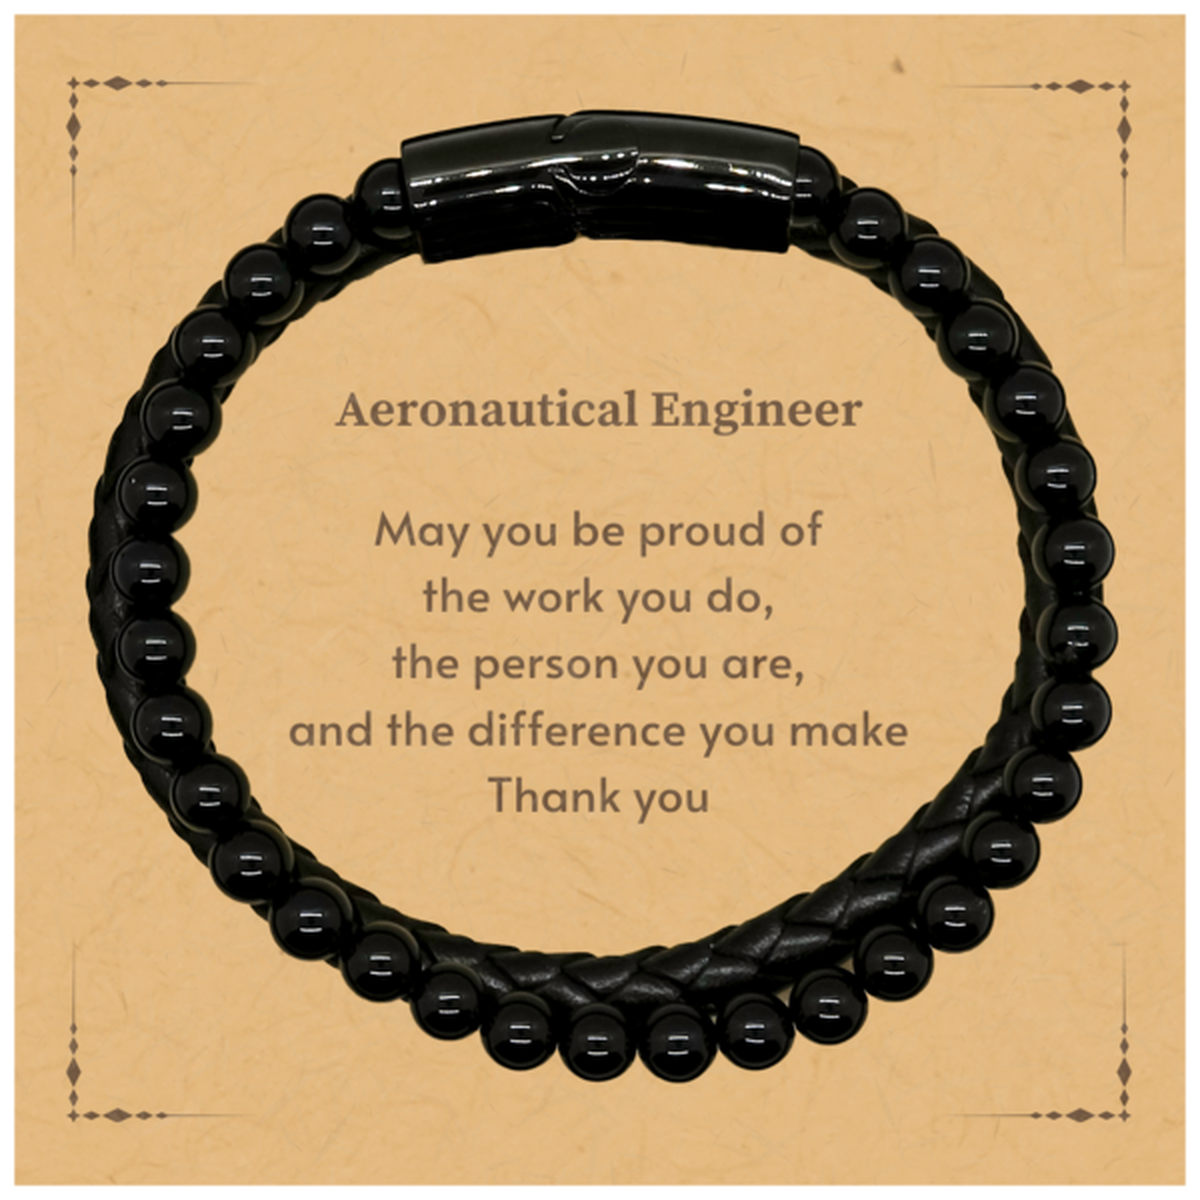 Heartwarming Stone Leather Bracelets Retirement Coworkers Gifts for Aeronautical Engineer, Aeronautical Engineer May You be proud of the work you do, the person you are Gifts for Boss Men Women Friends